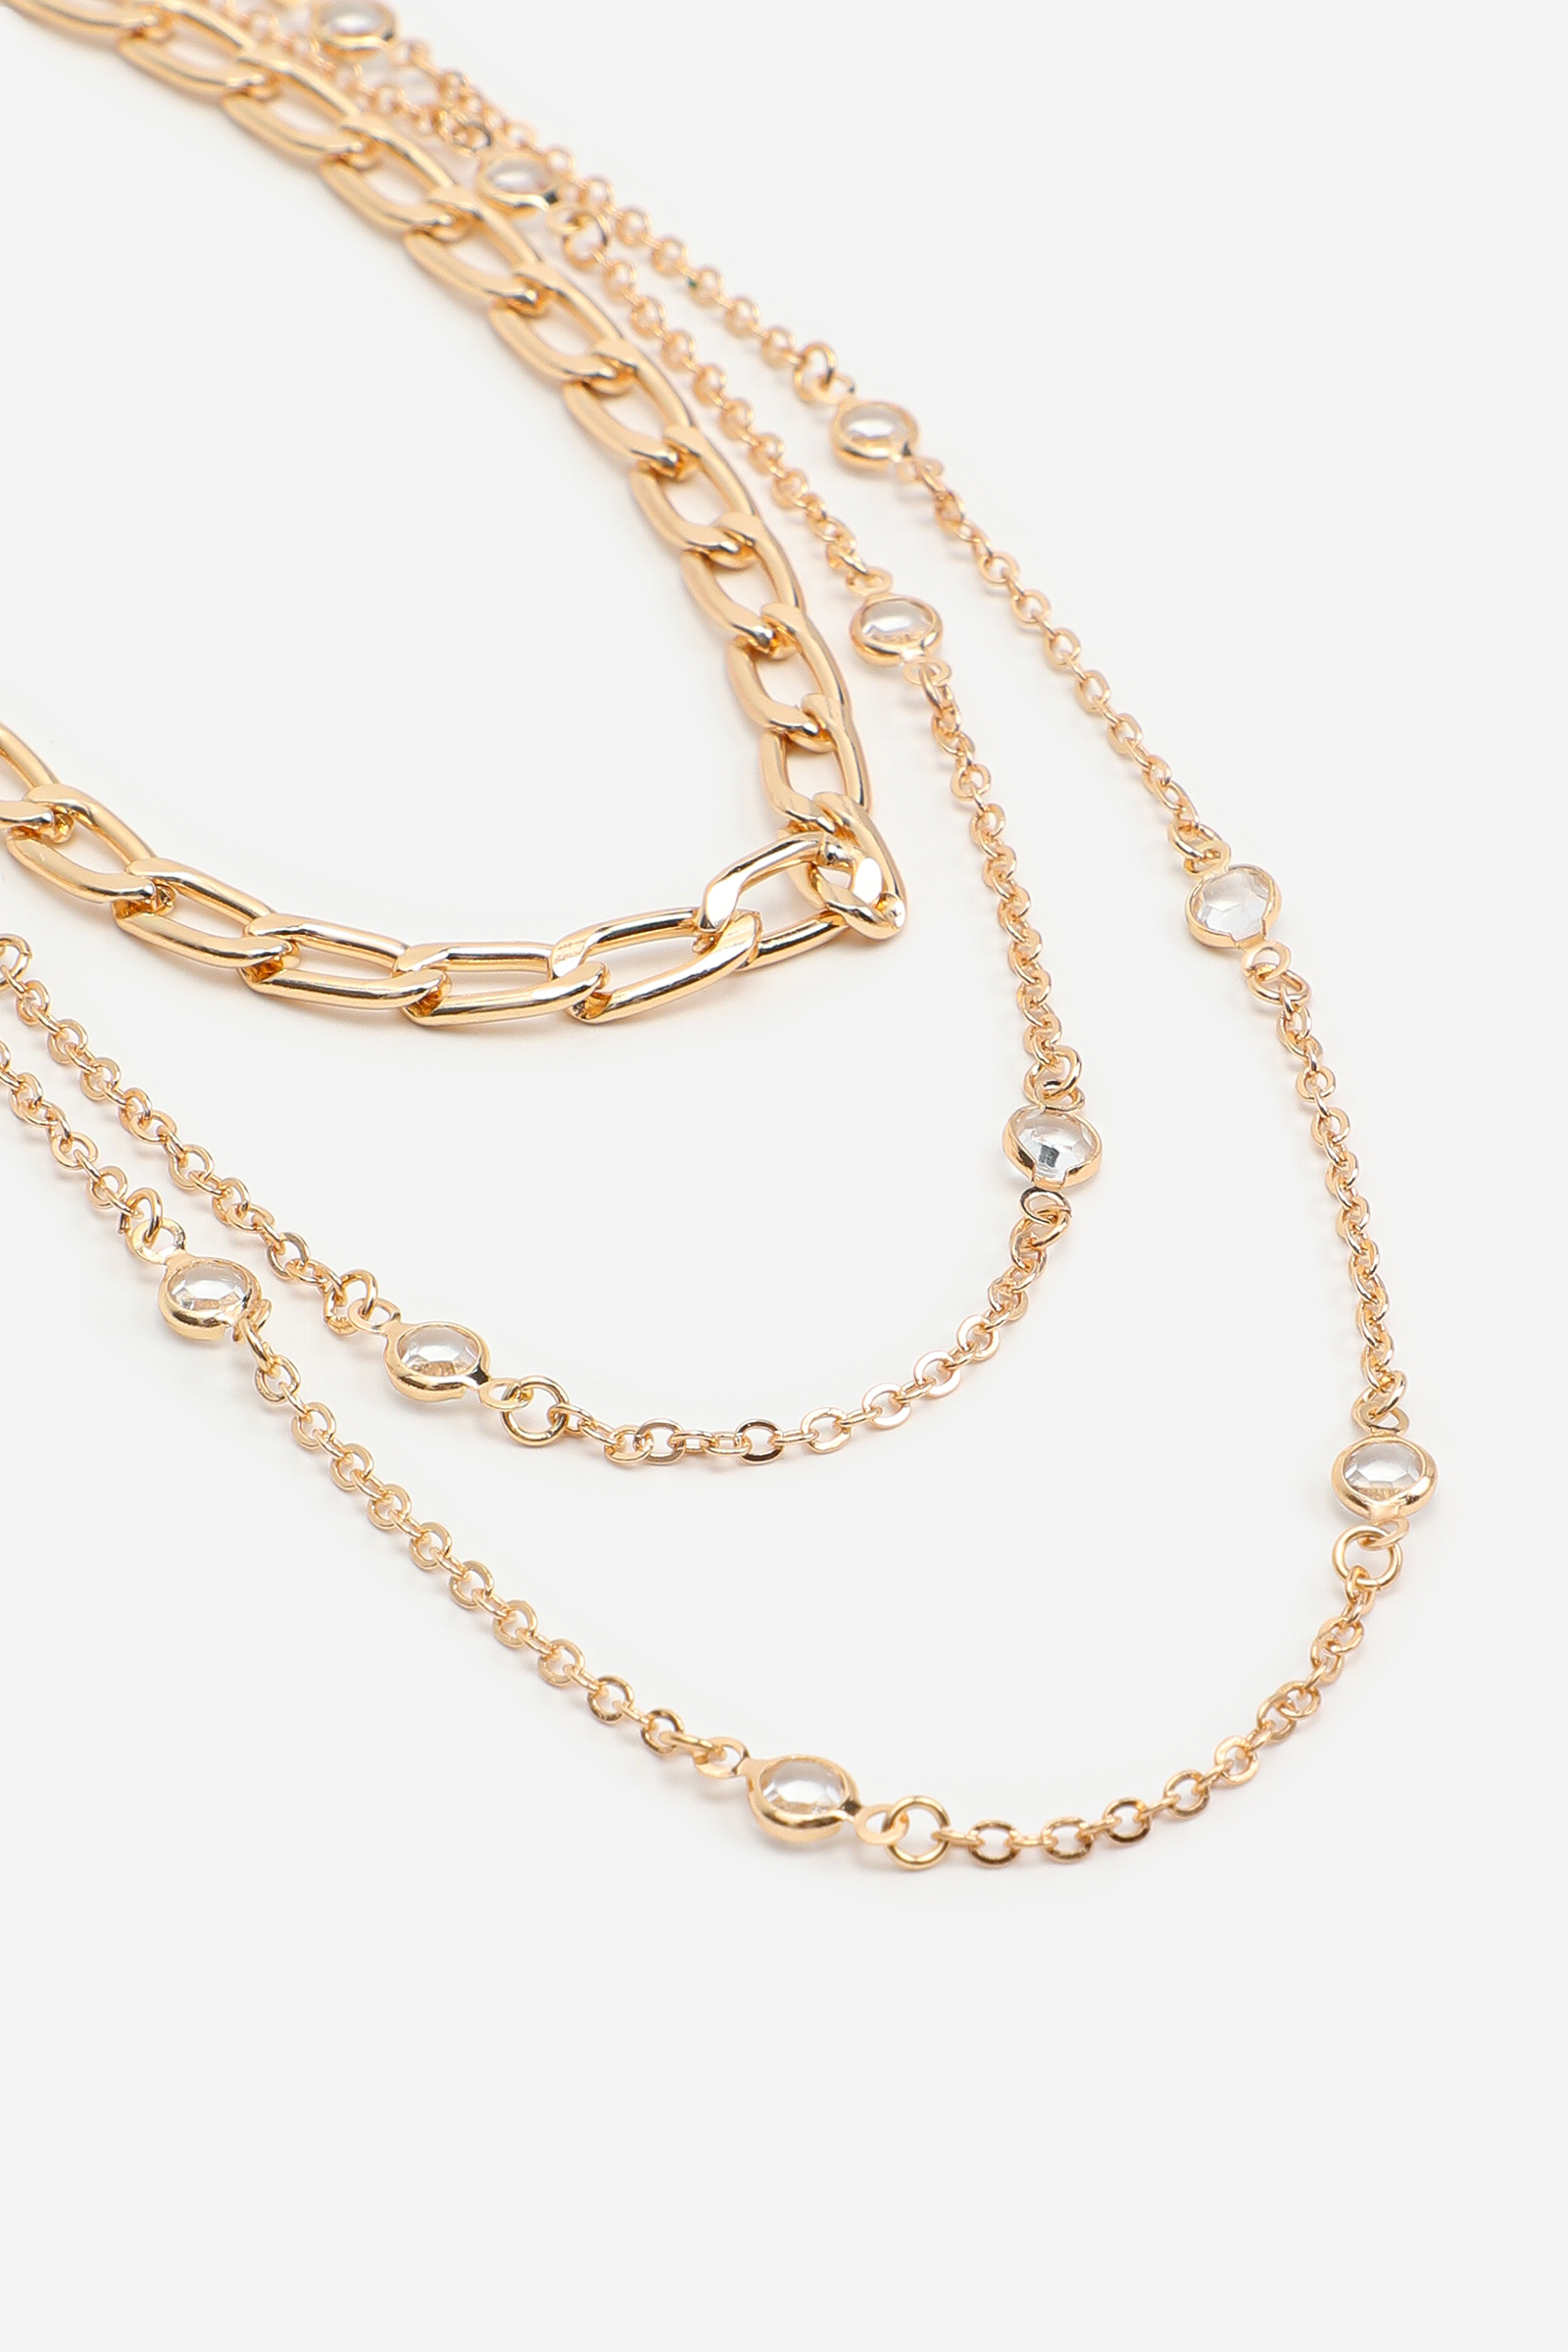 3-Row Chain Necklace with Bead Detail